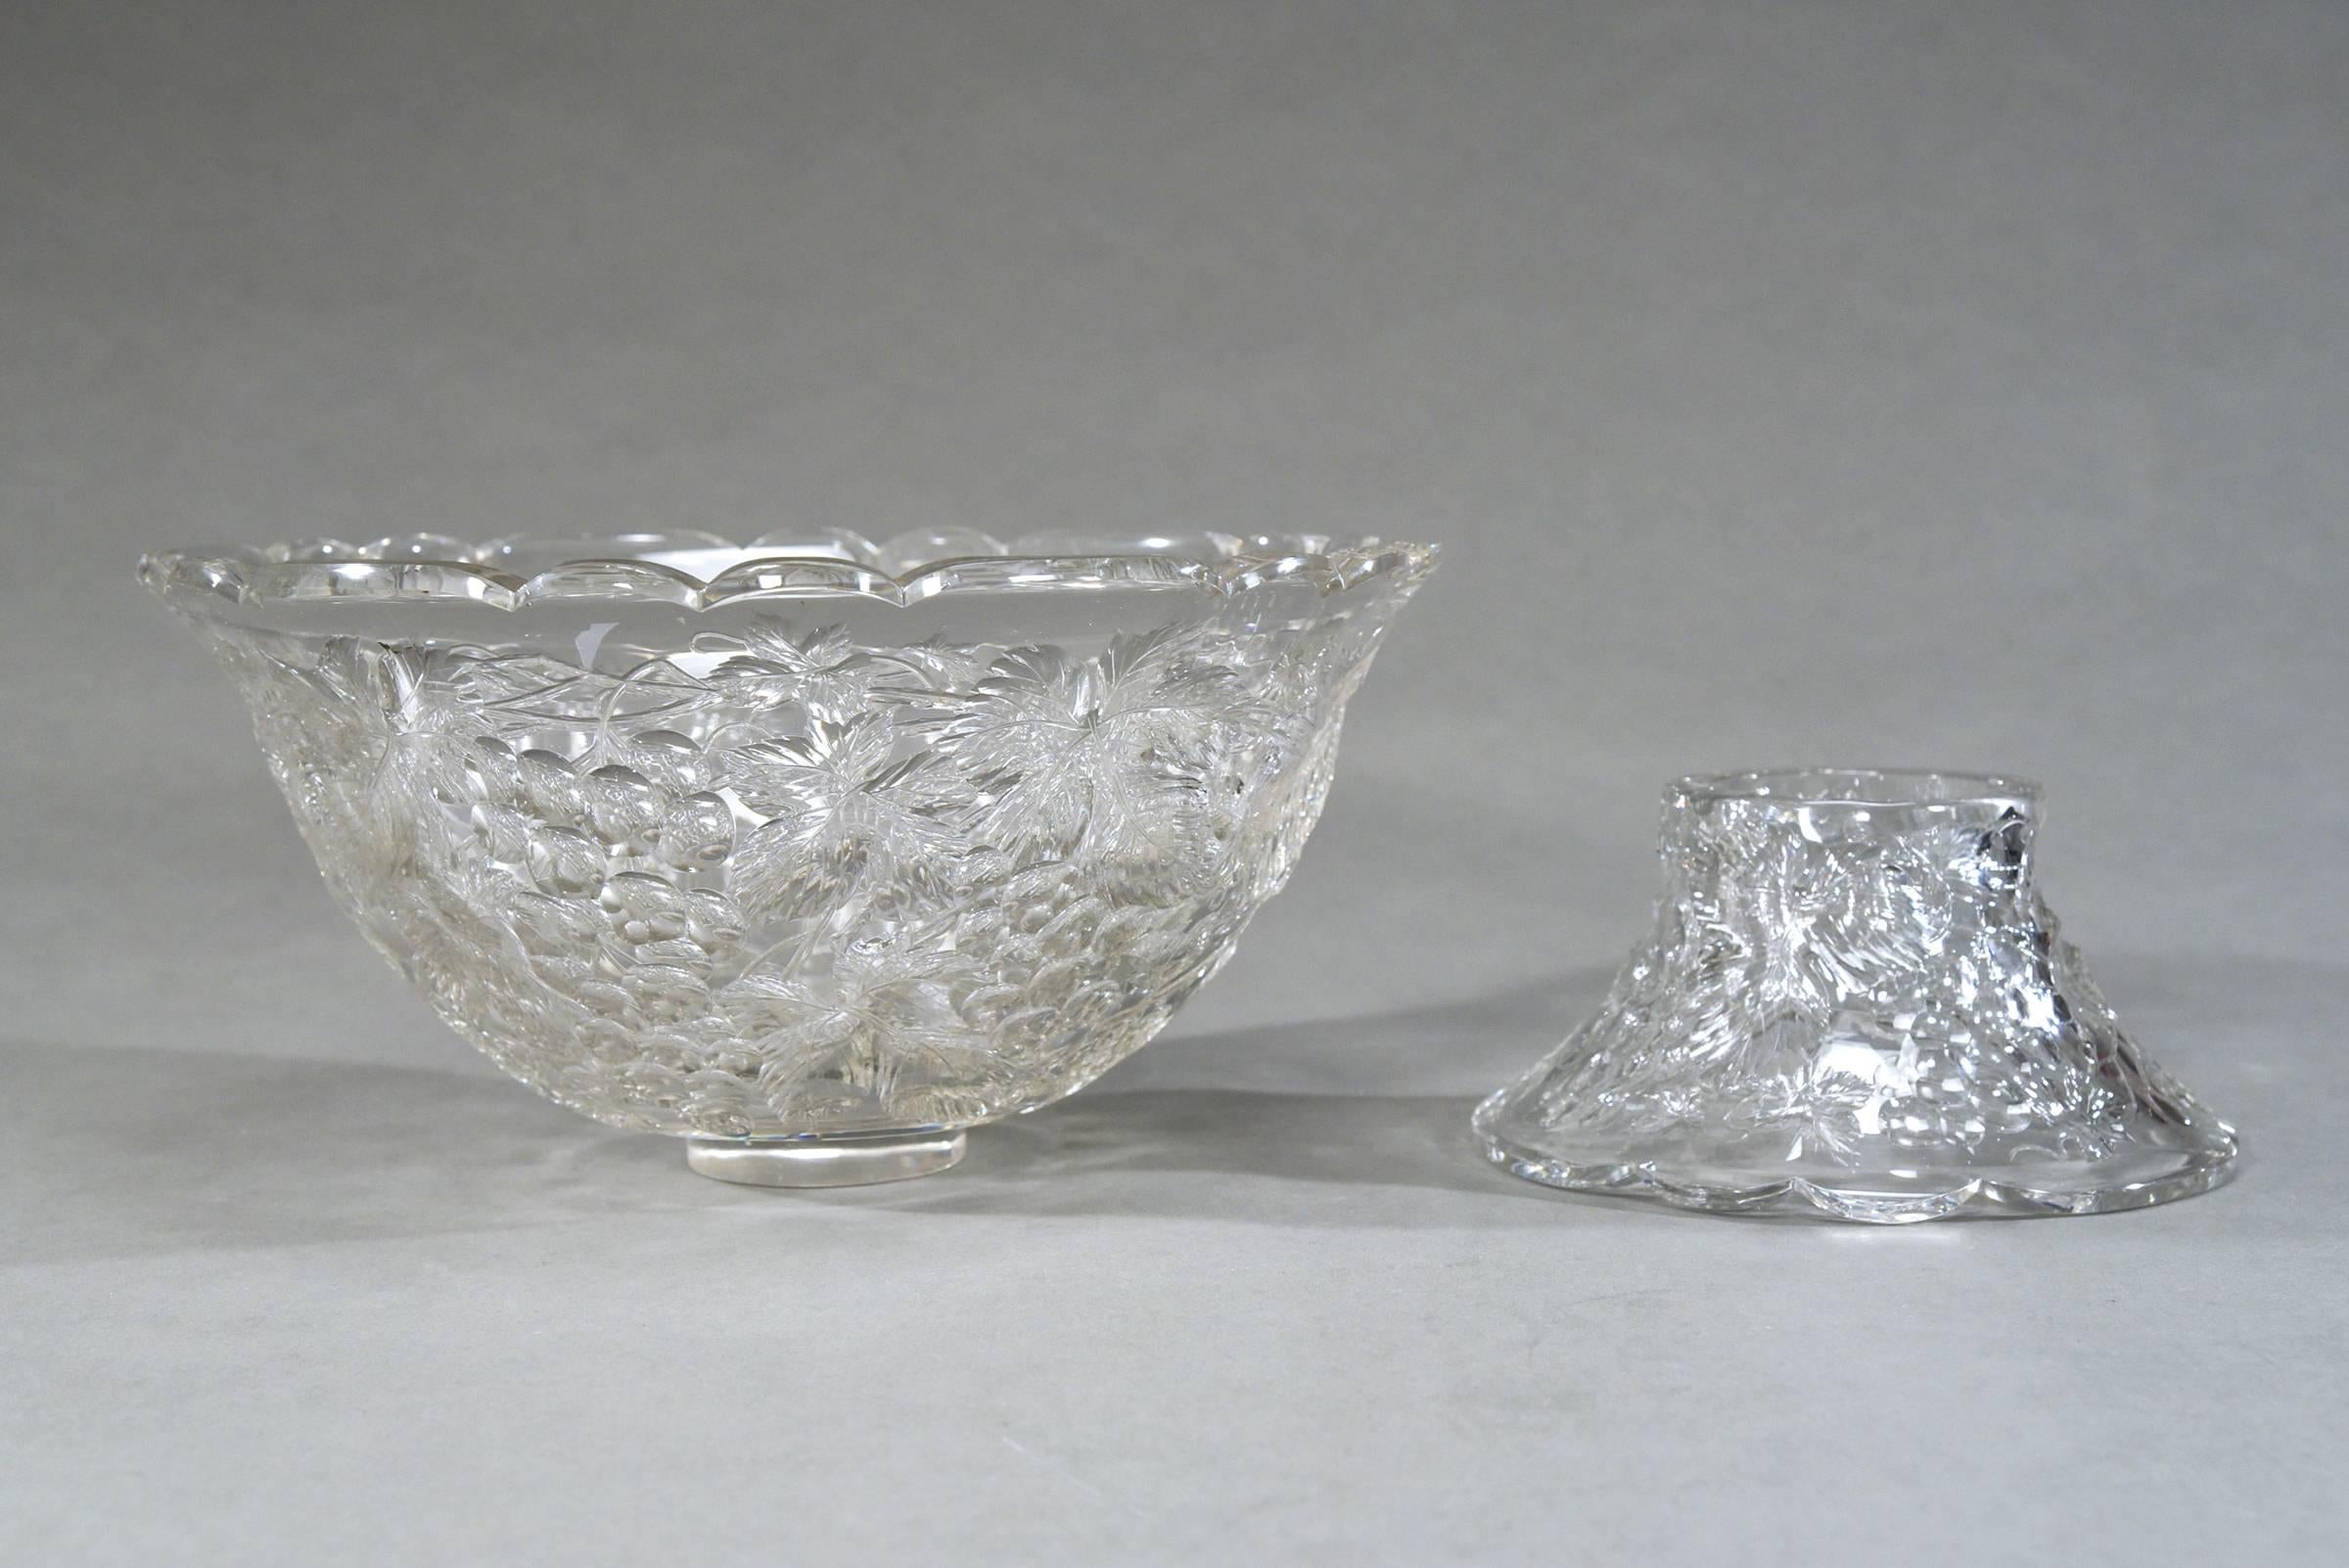 Hand Blown 2 Piece Intaglio Cut Crystal Punch Bowl with Grape Vine Pattern In Good Condition For Sale In Great Barrington, MA